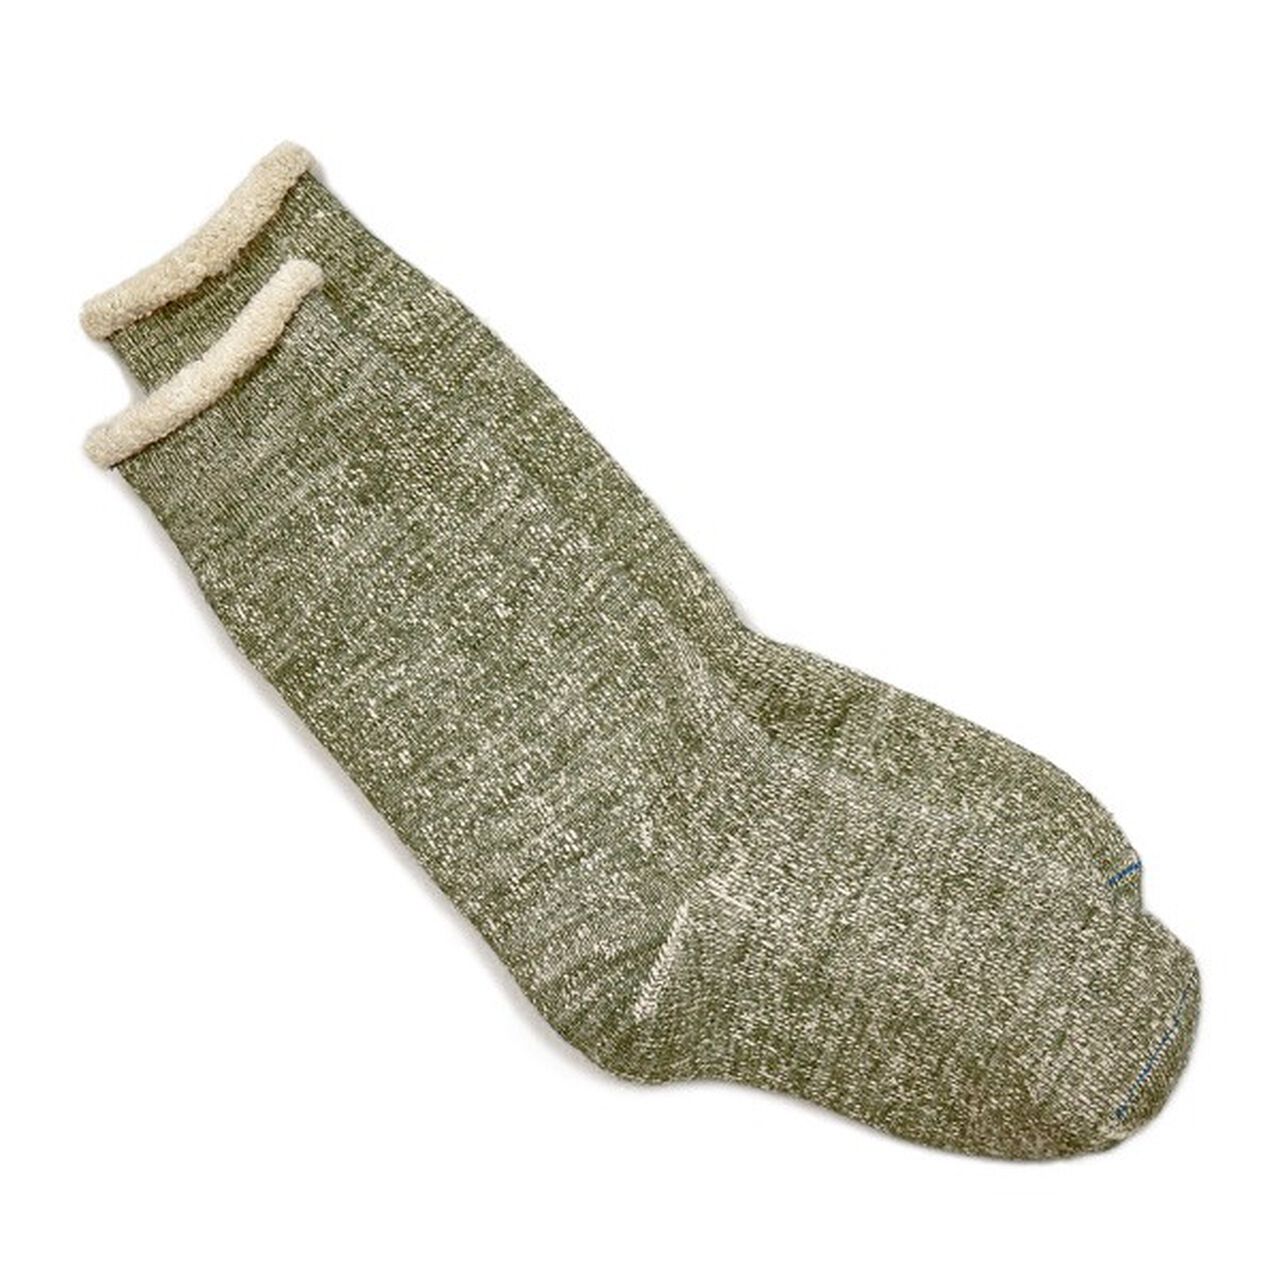 R1001 Double Face Socks,ArmyGreen, large image number 0